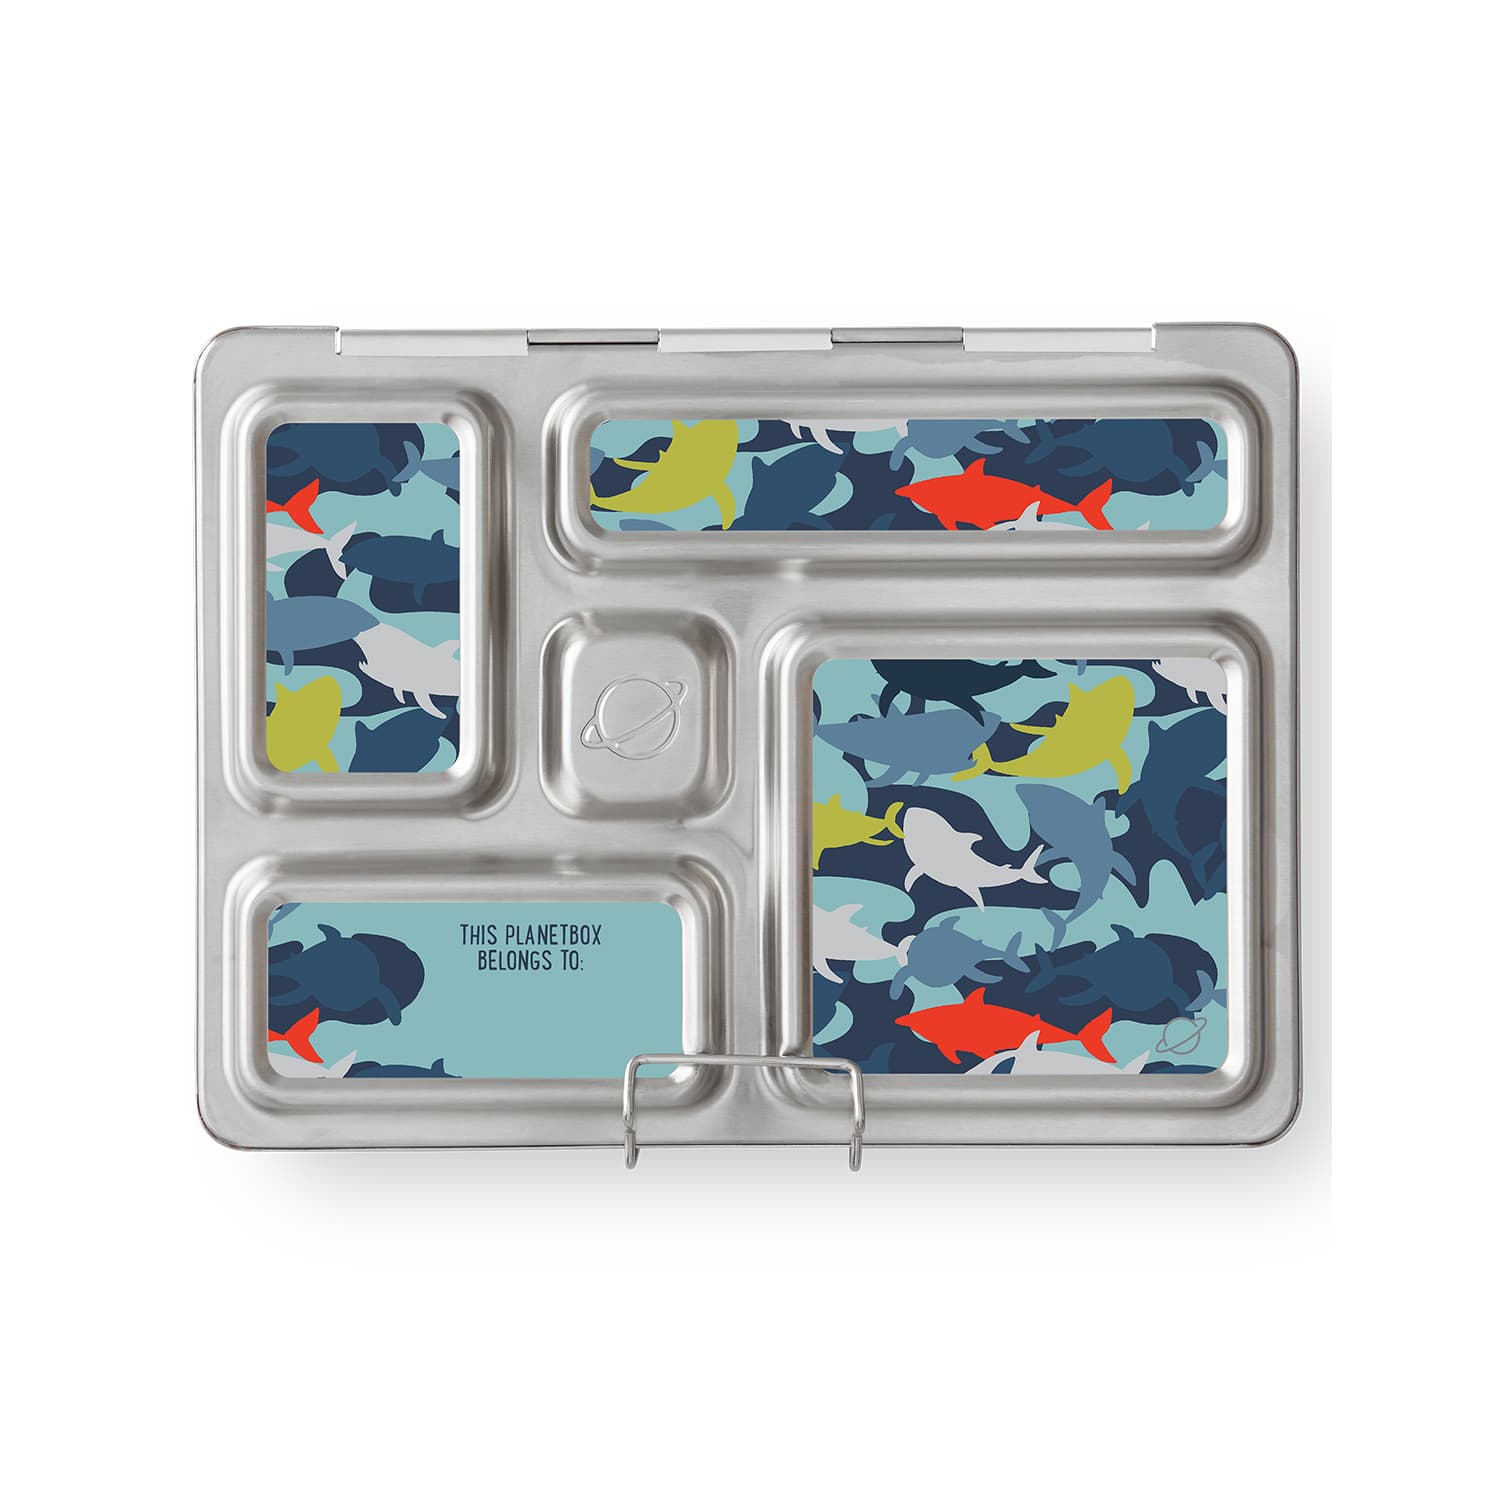 https://cdn.apartmenttherapy.info/image/upload/v1658851303/k/Photo/Lifestyle/2022-08-megatesting-best-lunch-containers/planetbox-rover-stainless-steel-lunch-box.jpg